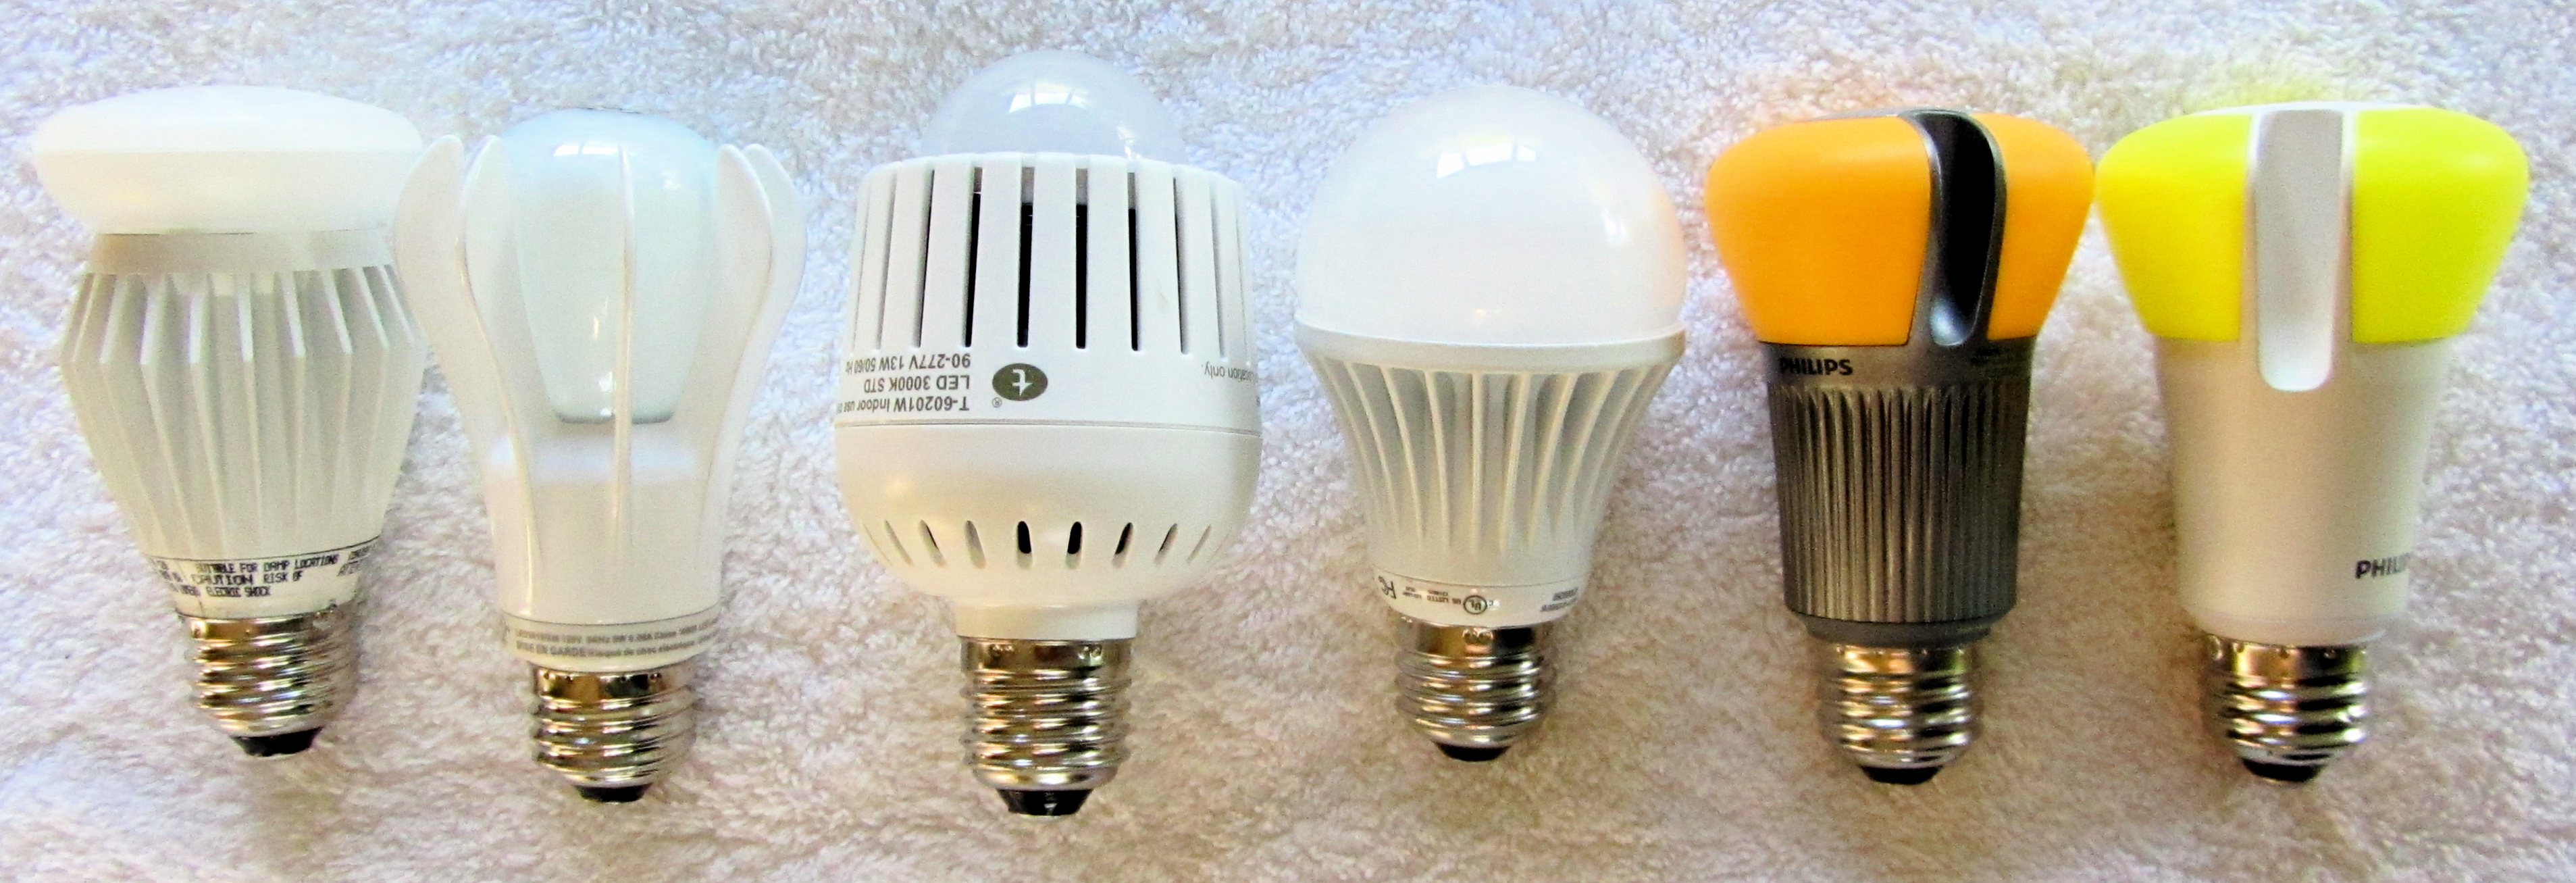 Li-Fi: Chinese scientists figure out how to send internet through light bulbs